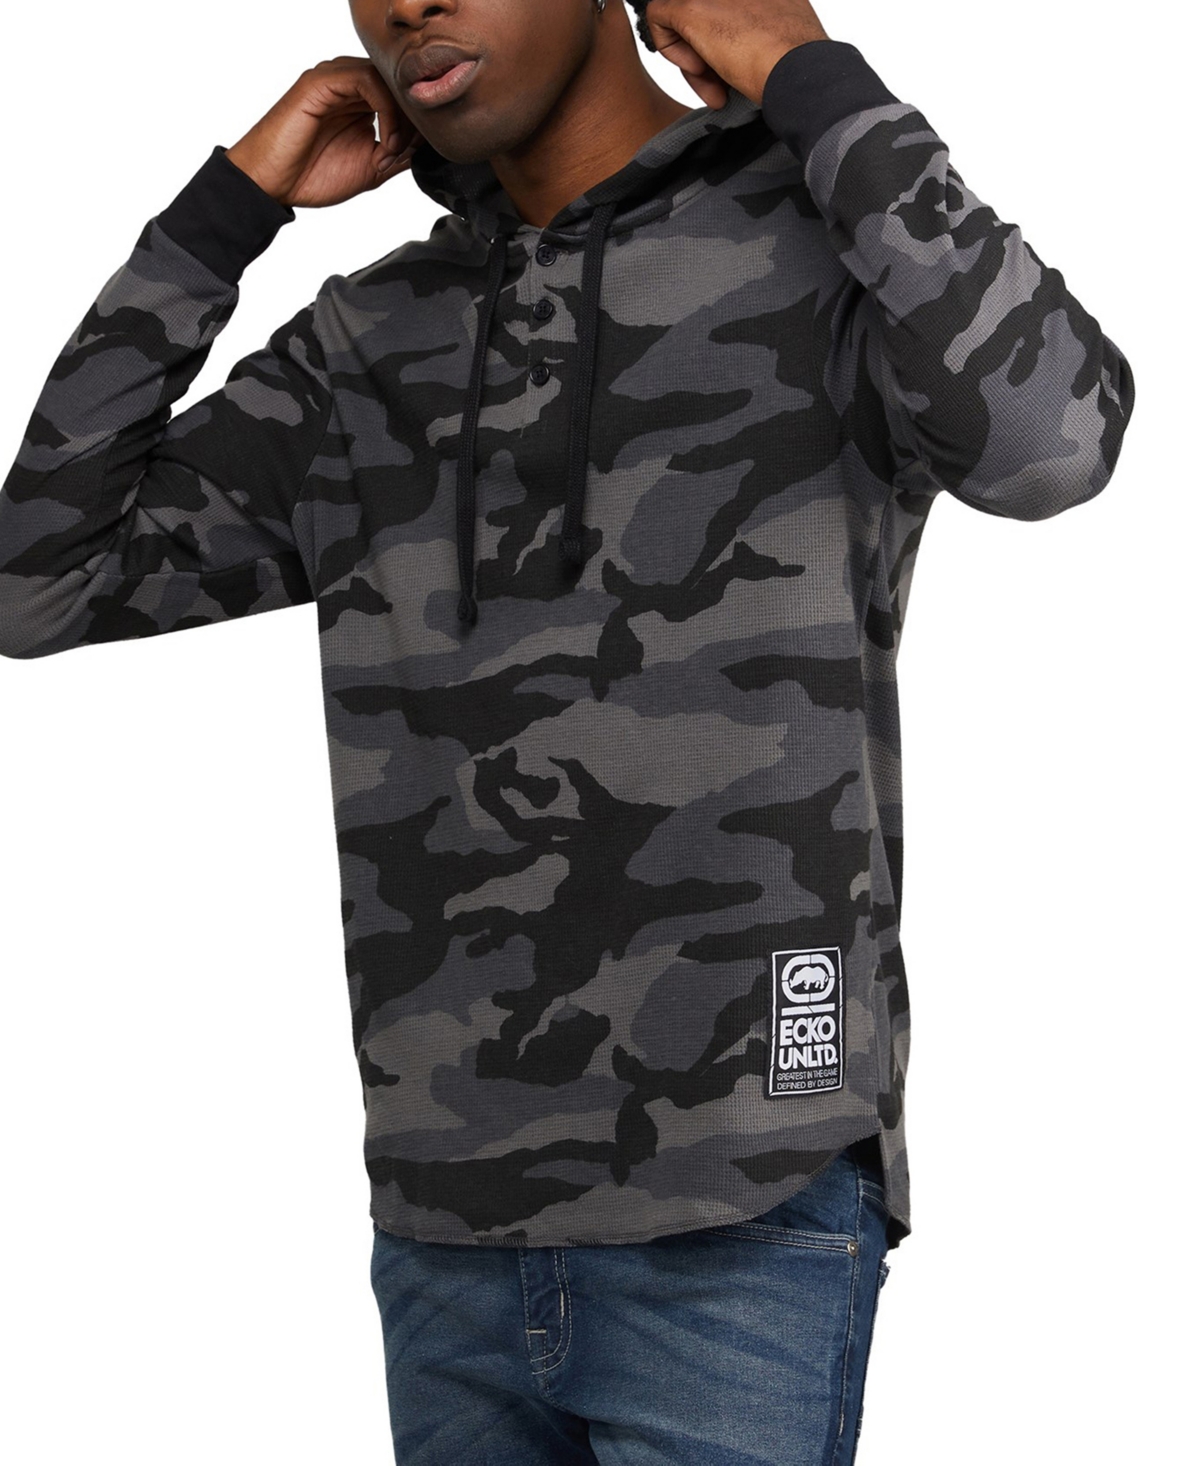 Men's Hooded Solid Stunner 2.0 Thermal Sweater - Street Camo